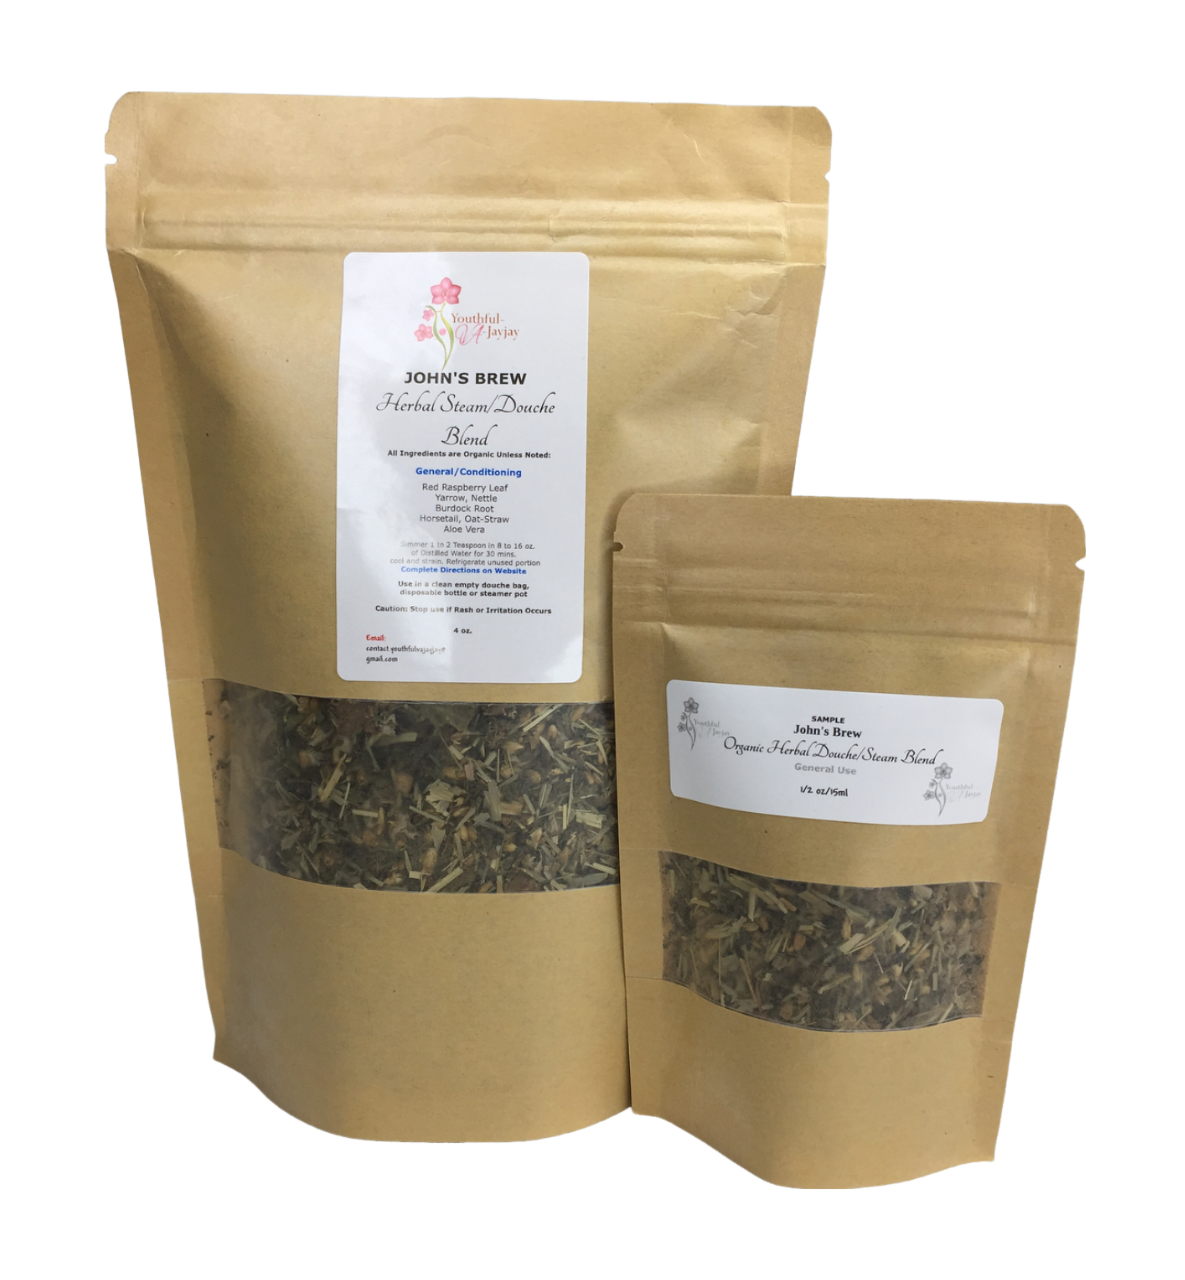 JOHN'S BREW- Organic Herbal Douche/Steam Blend: For Him, Handcrafted, General Conditioning 4oz.